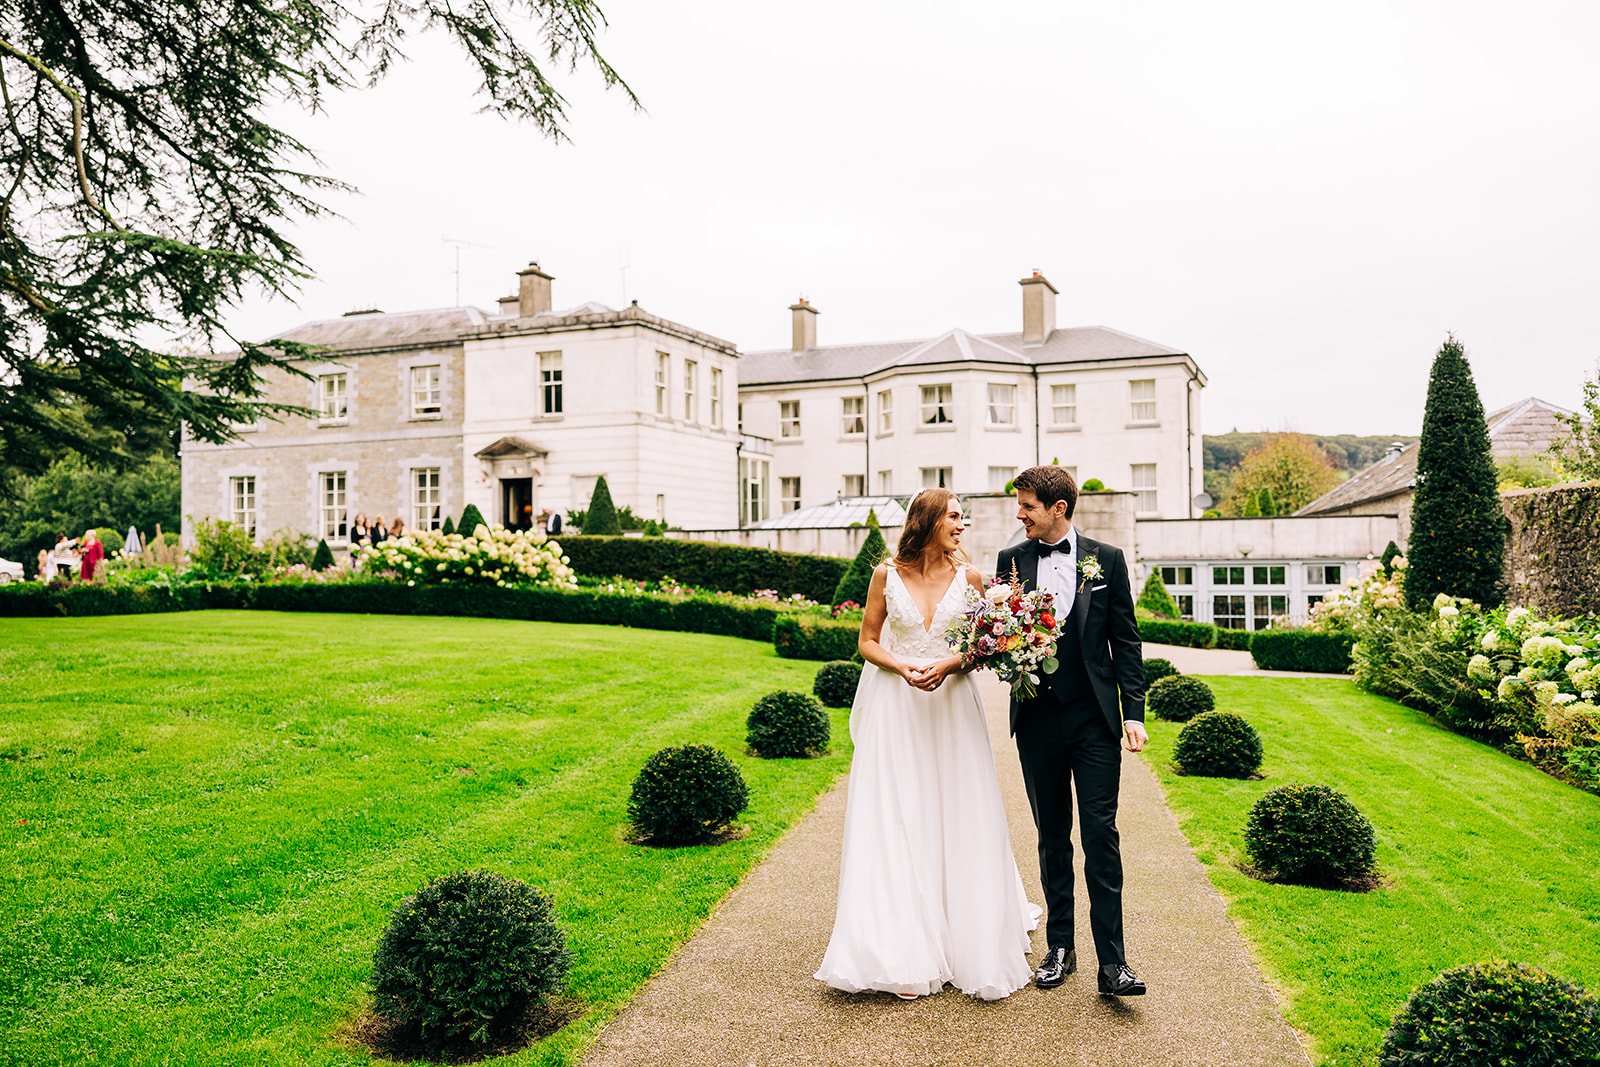 orla and Ronan pose for some wedding photos in tankardstown house